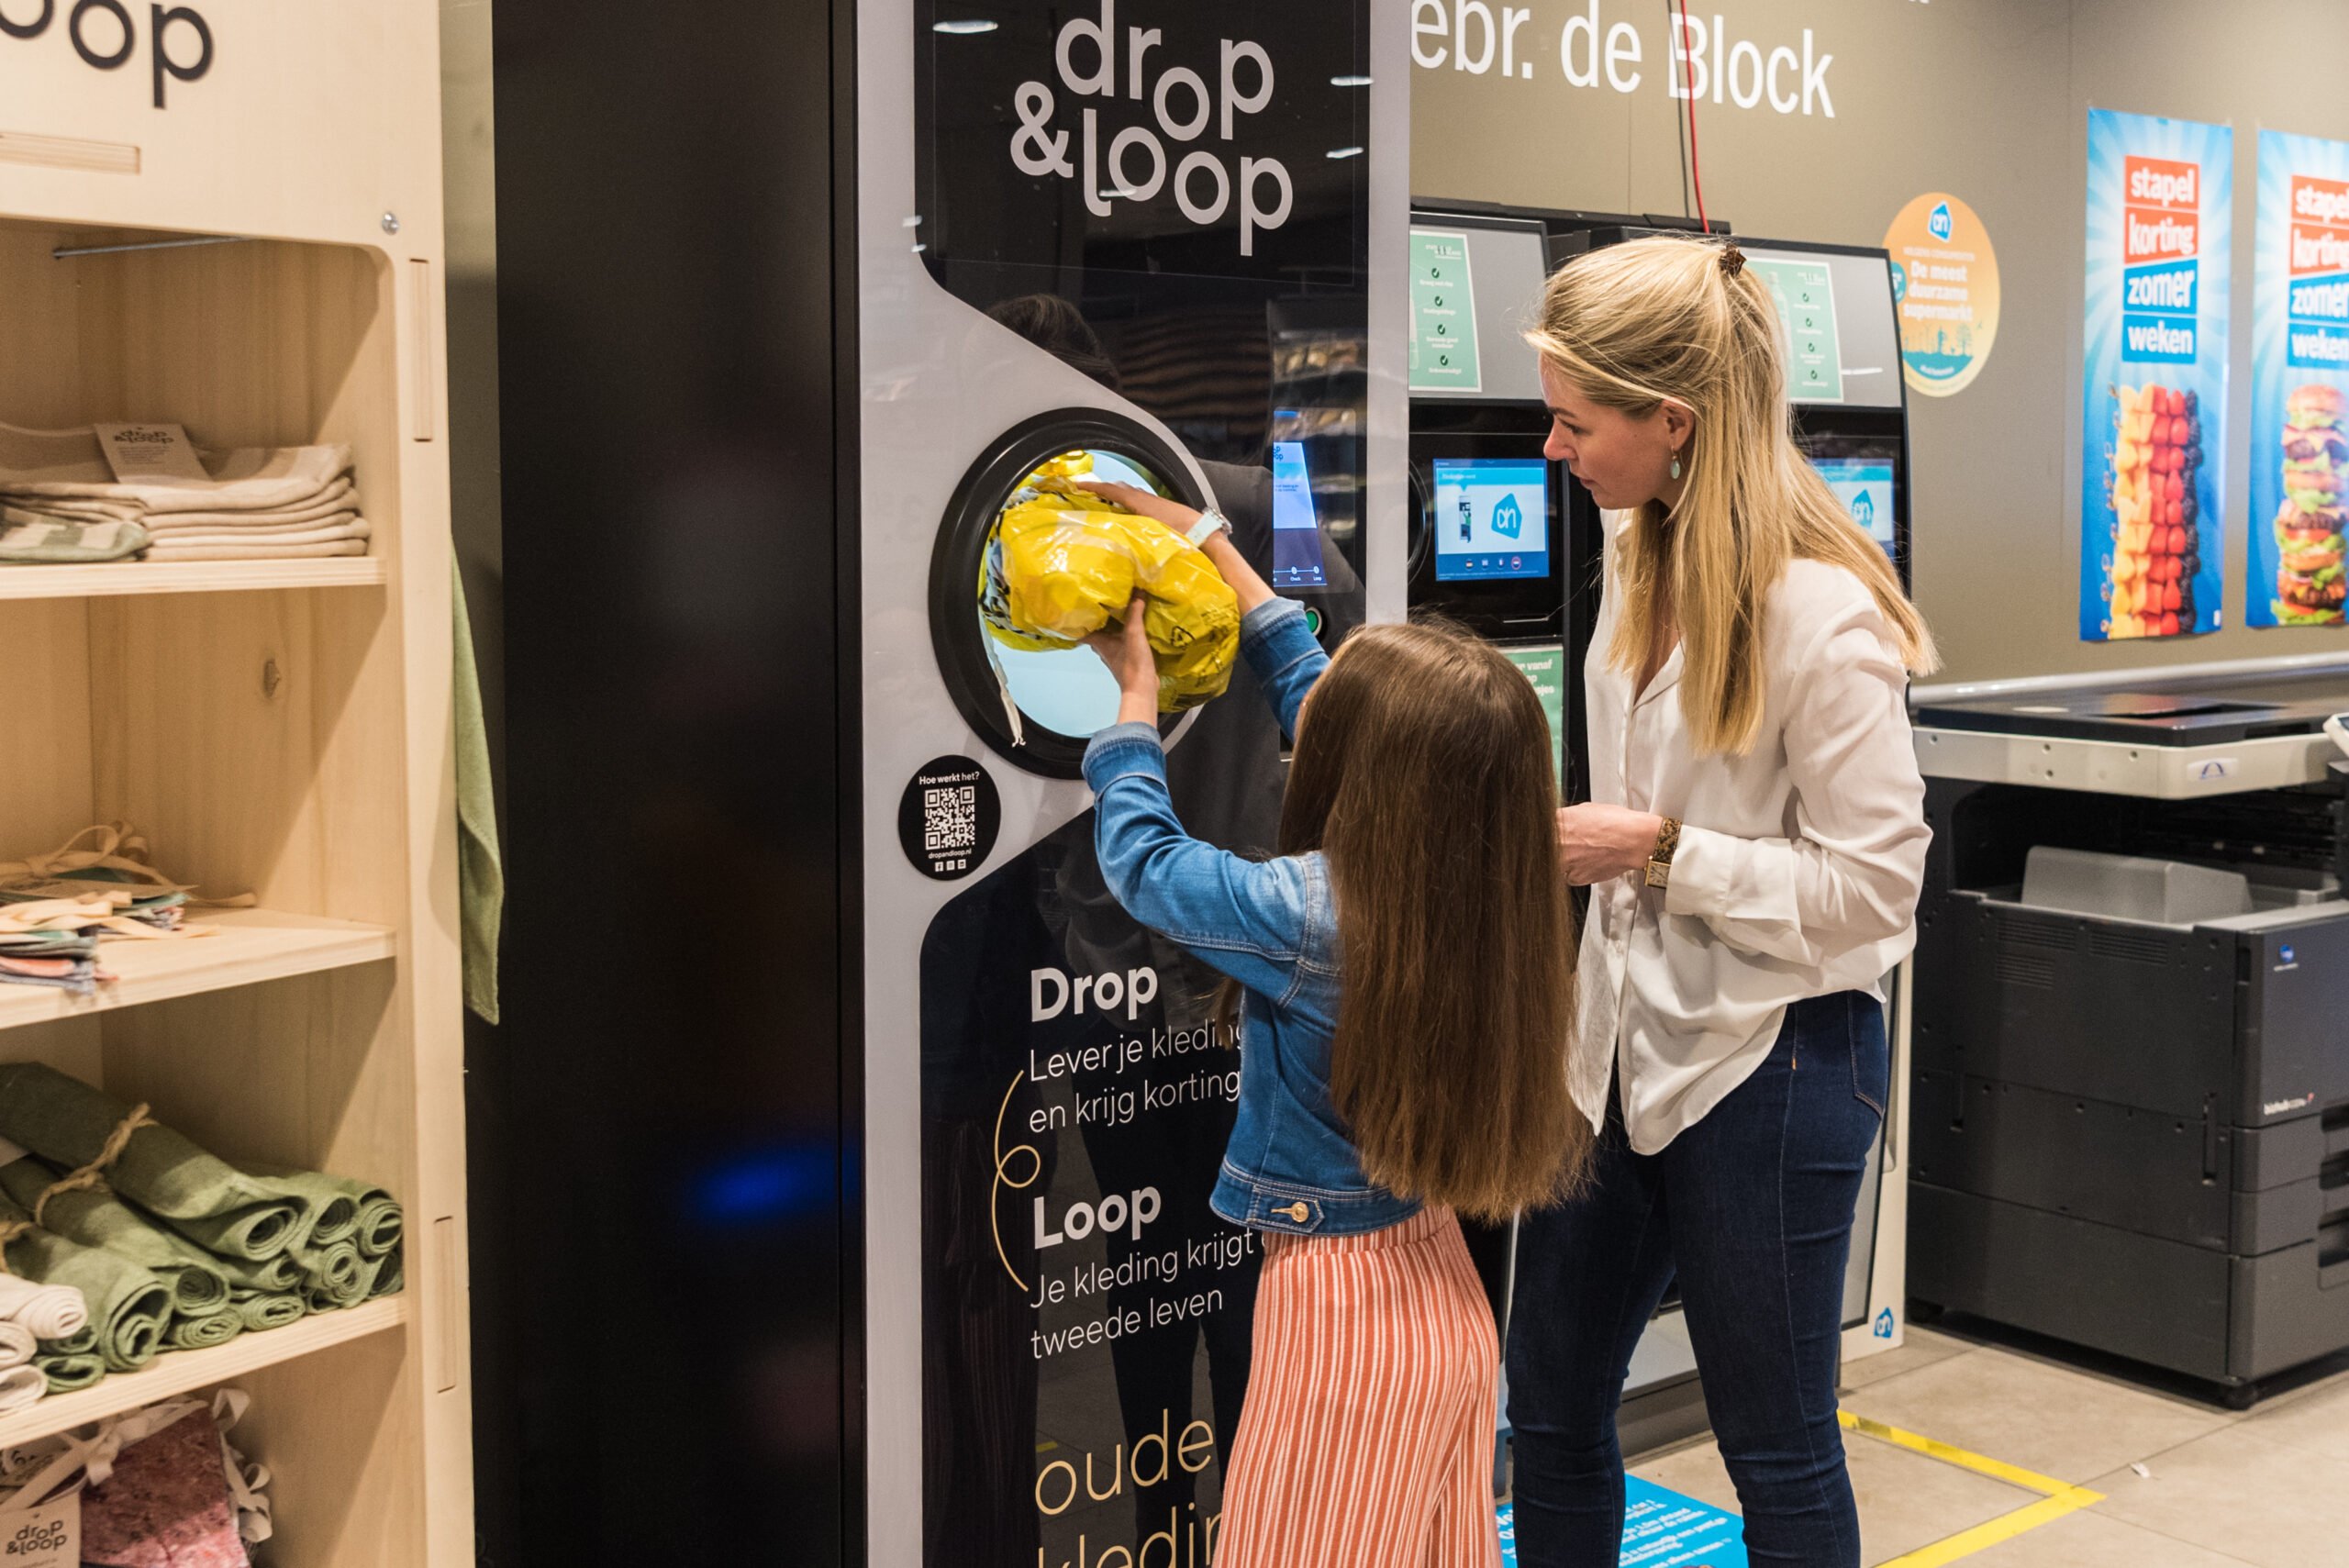 With the Drop & Loop dispenser, you recycle clothes as easily as you do returnable bottles